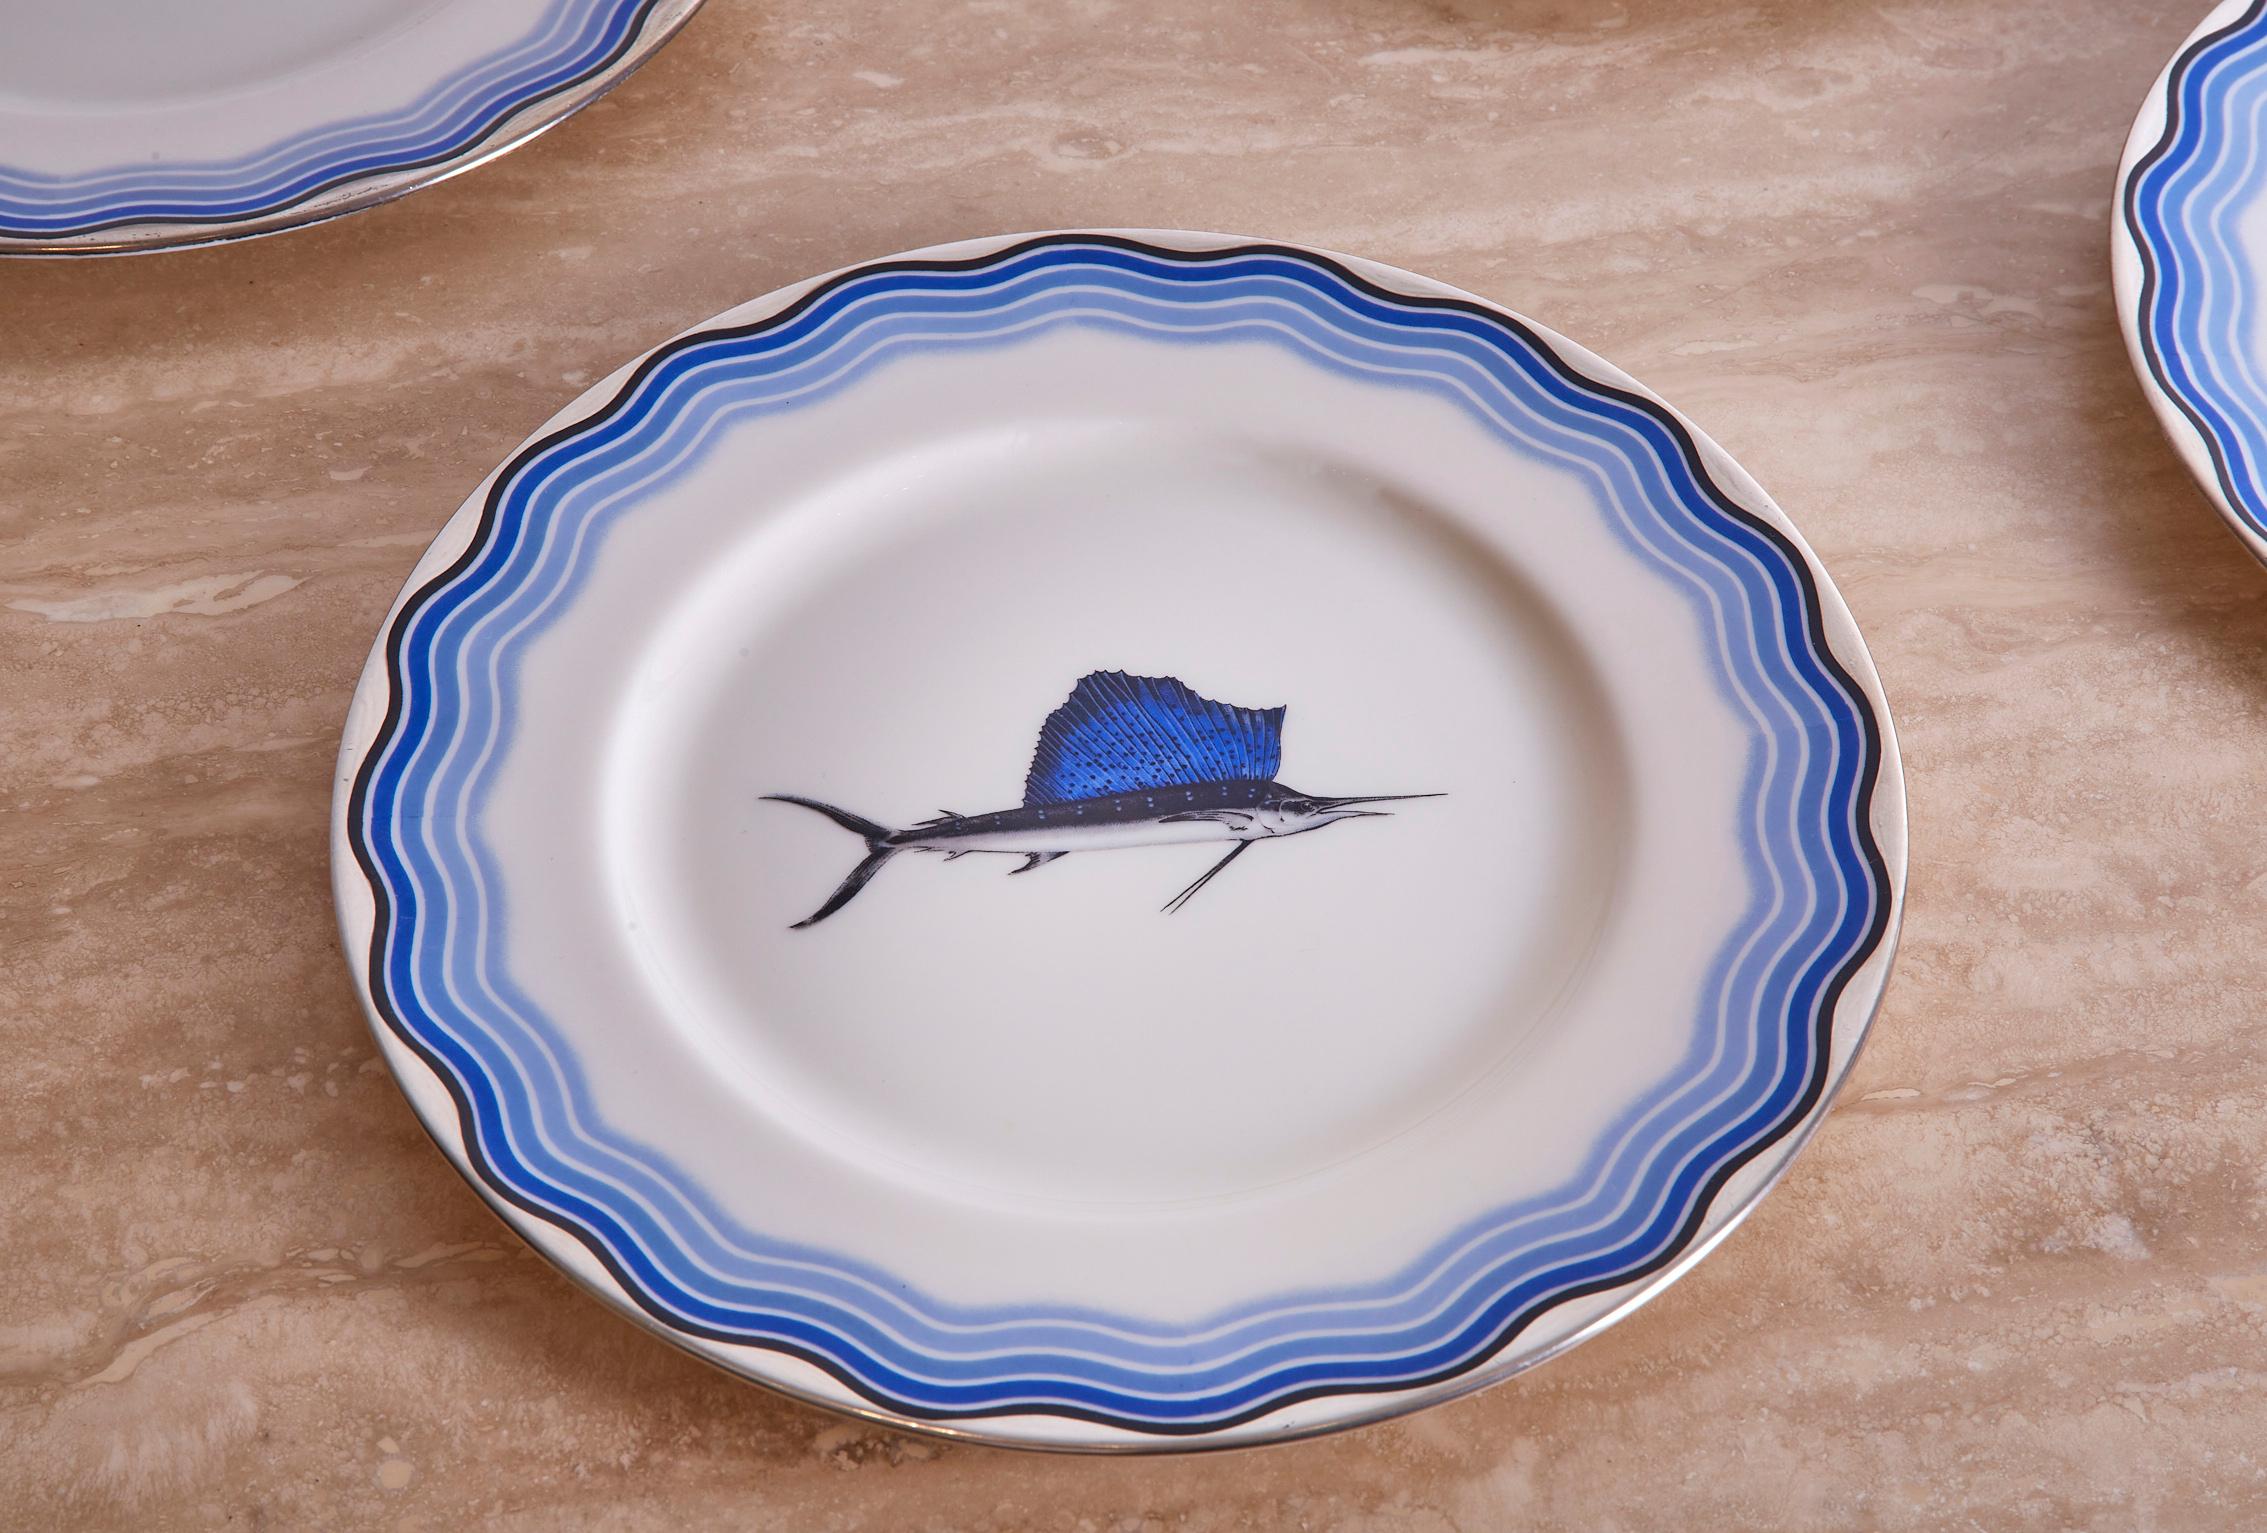 This is a fabulous set of 17 Lenox custom order service plates with undulating 